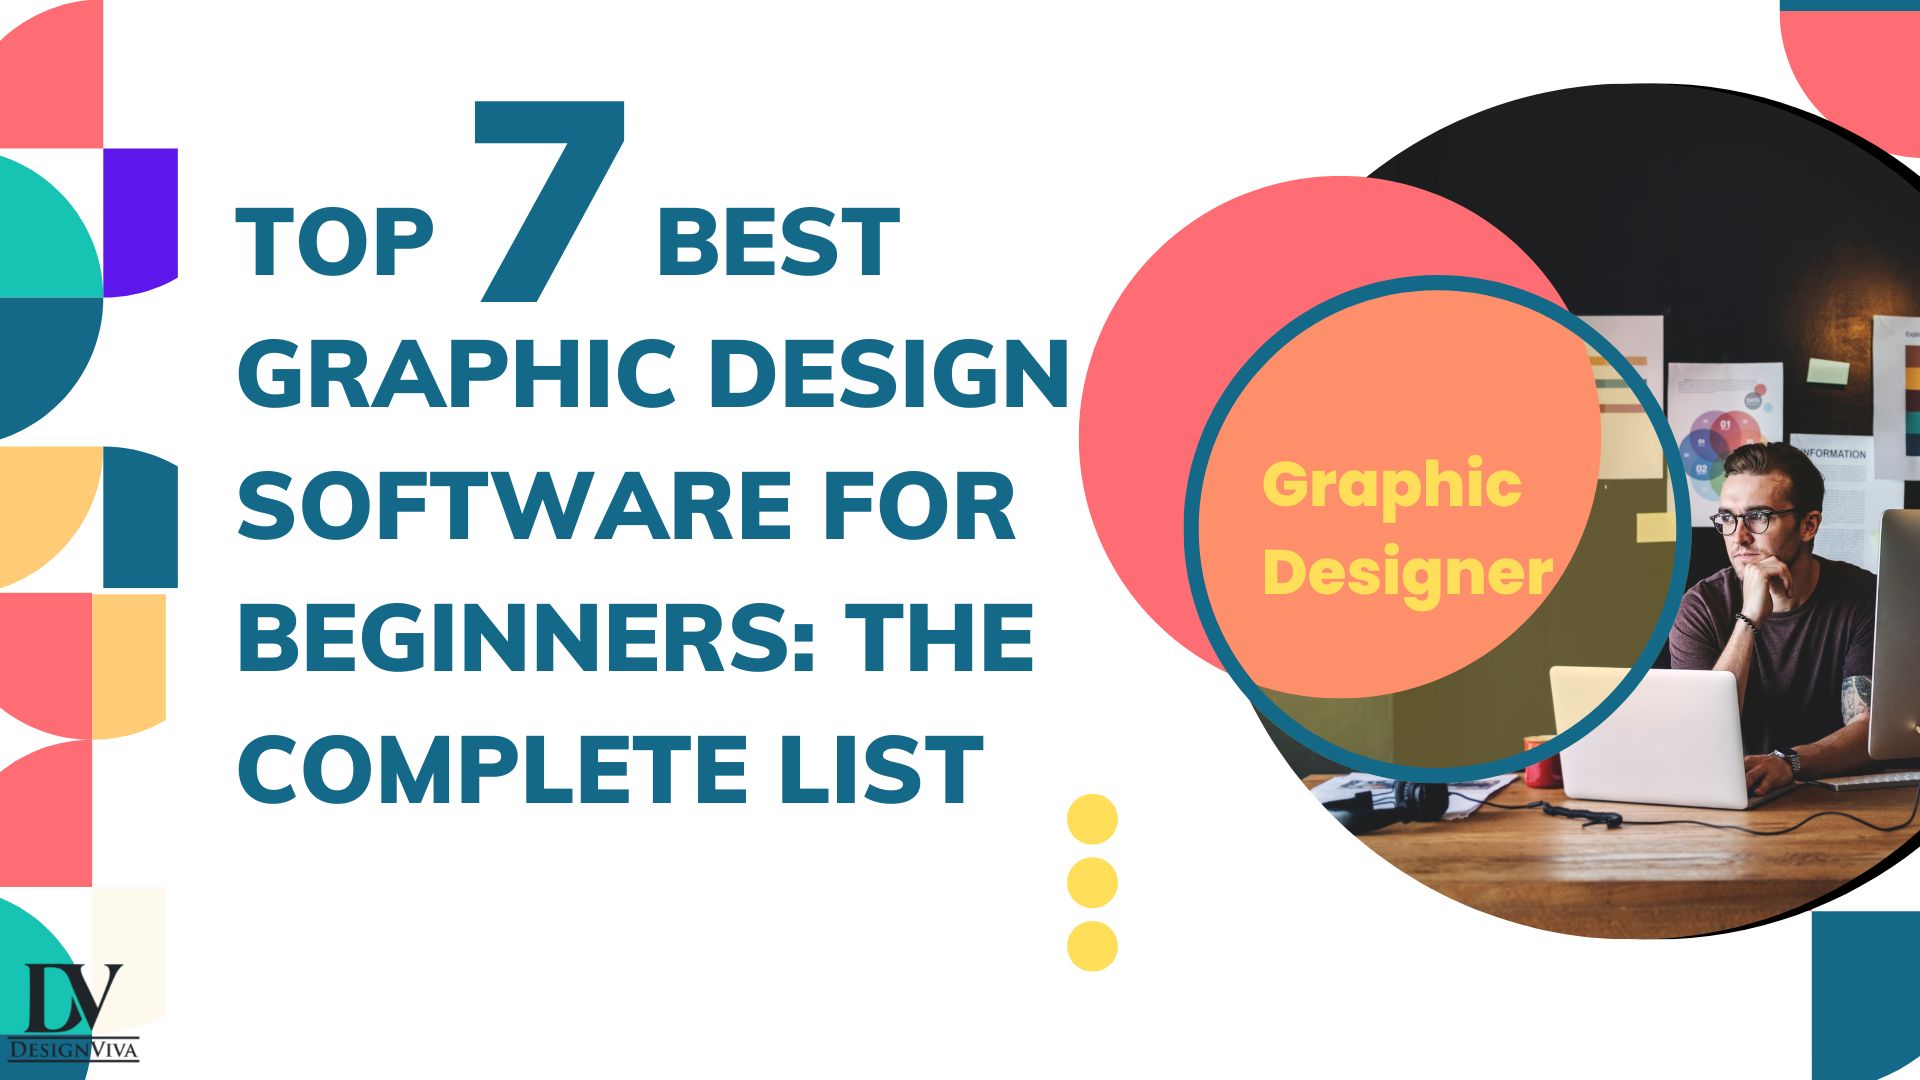 Top 7 Best Graphic Design Software For Beginners: The Complete List